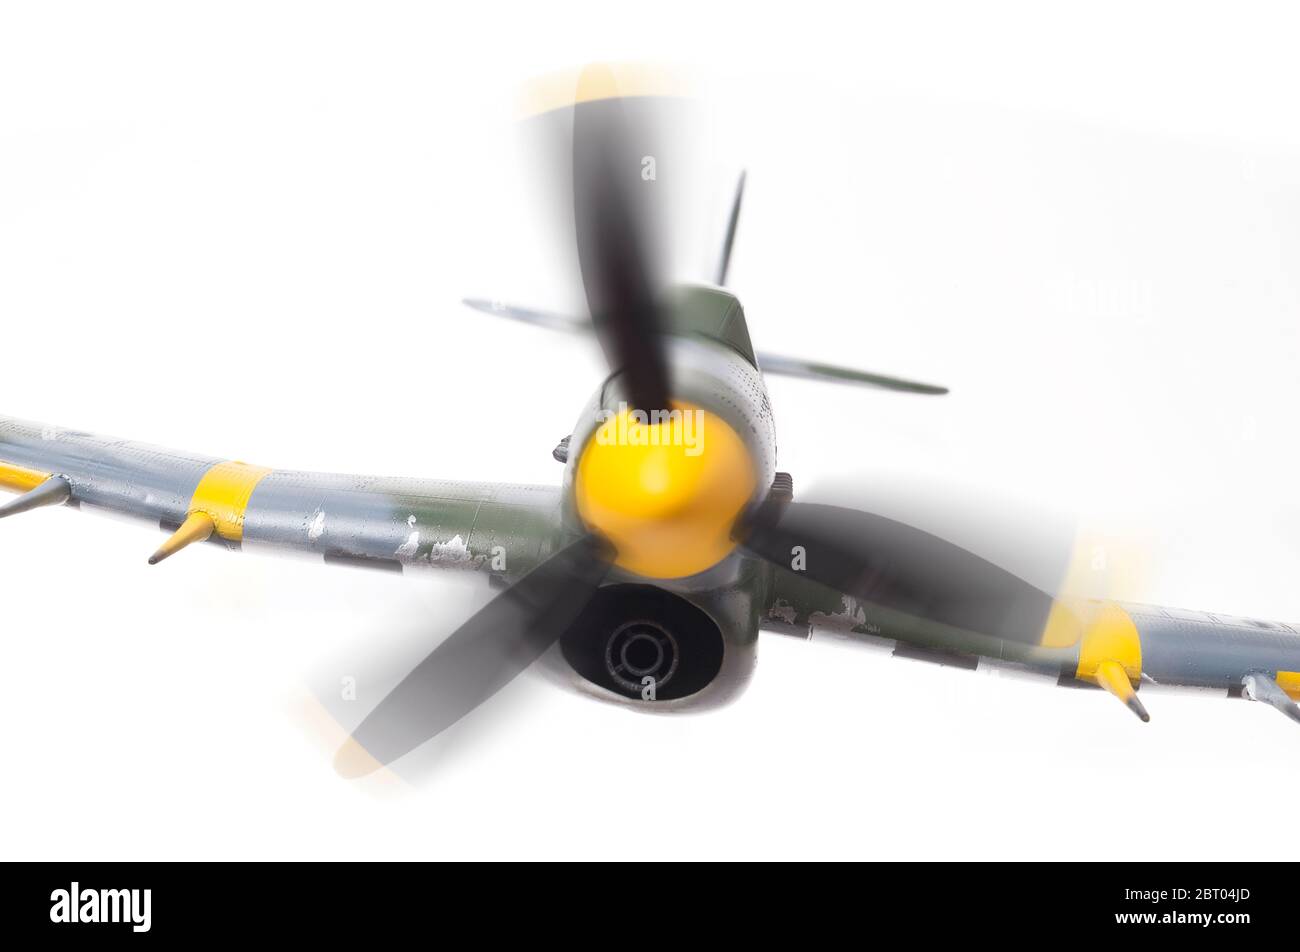 WWII RAF Typhoon aircraft scale model with blurred propellers, nose view Stock Photo